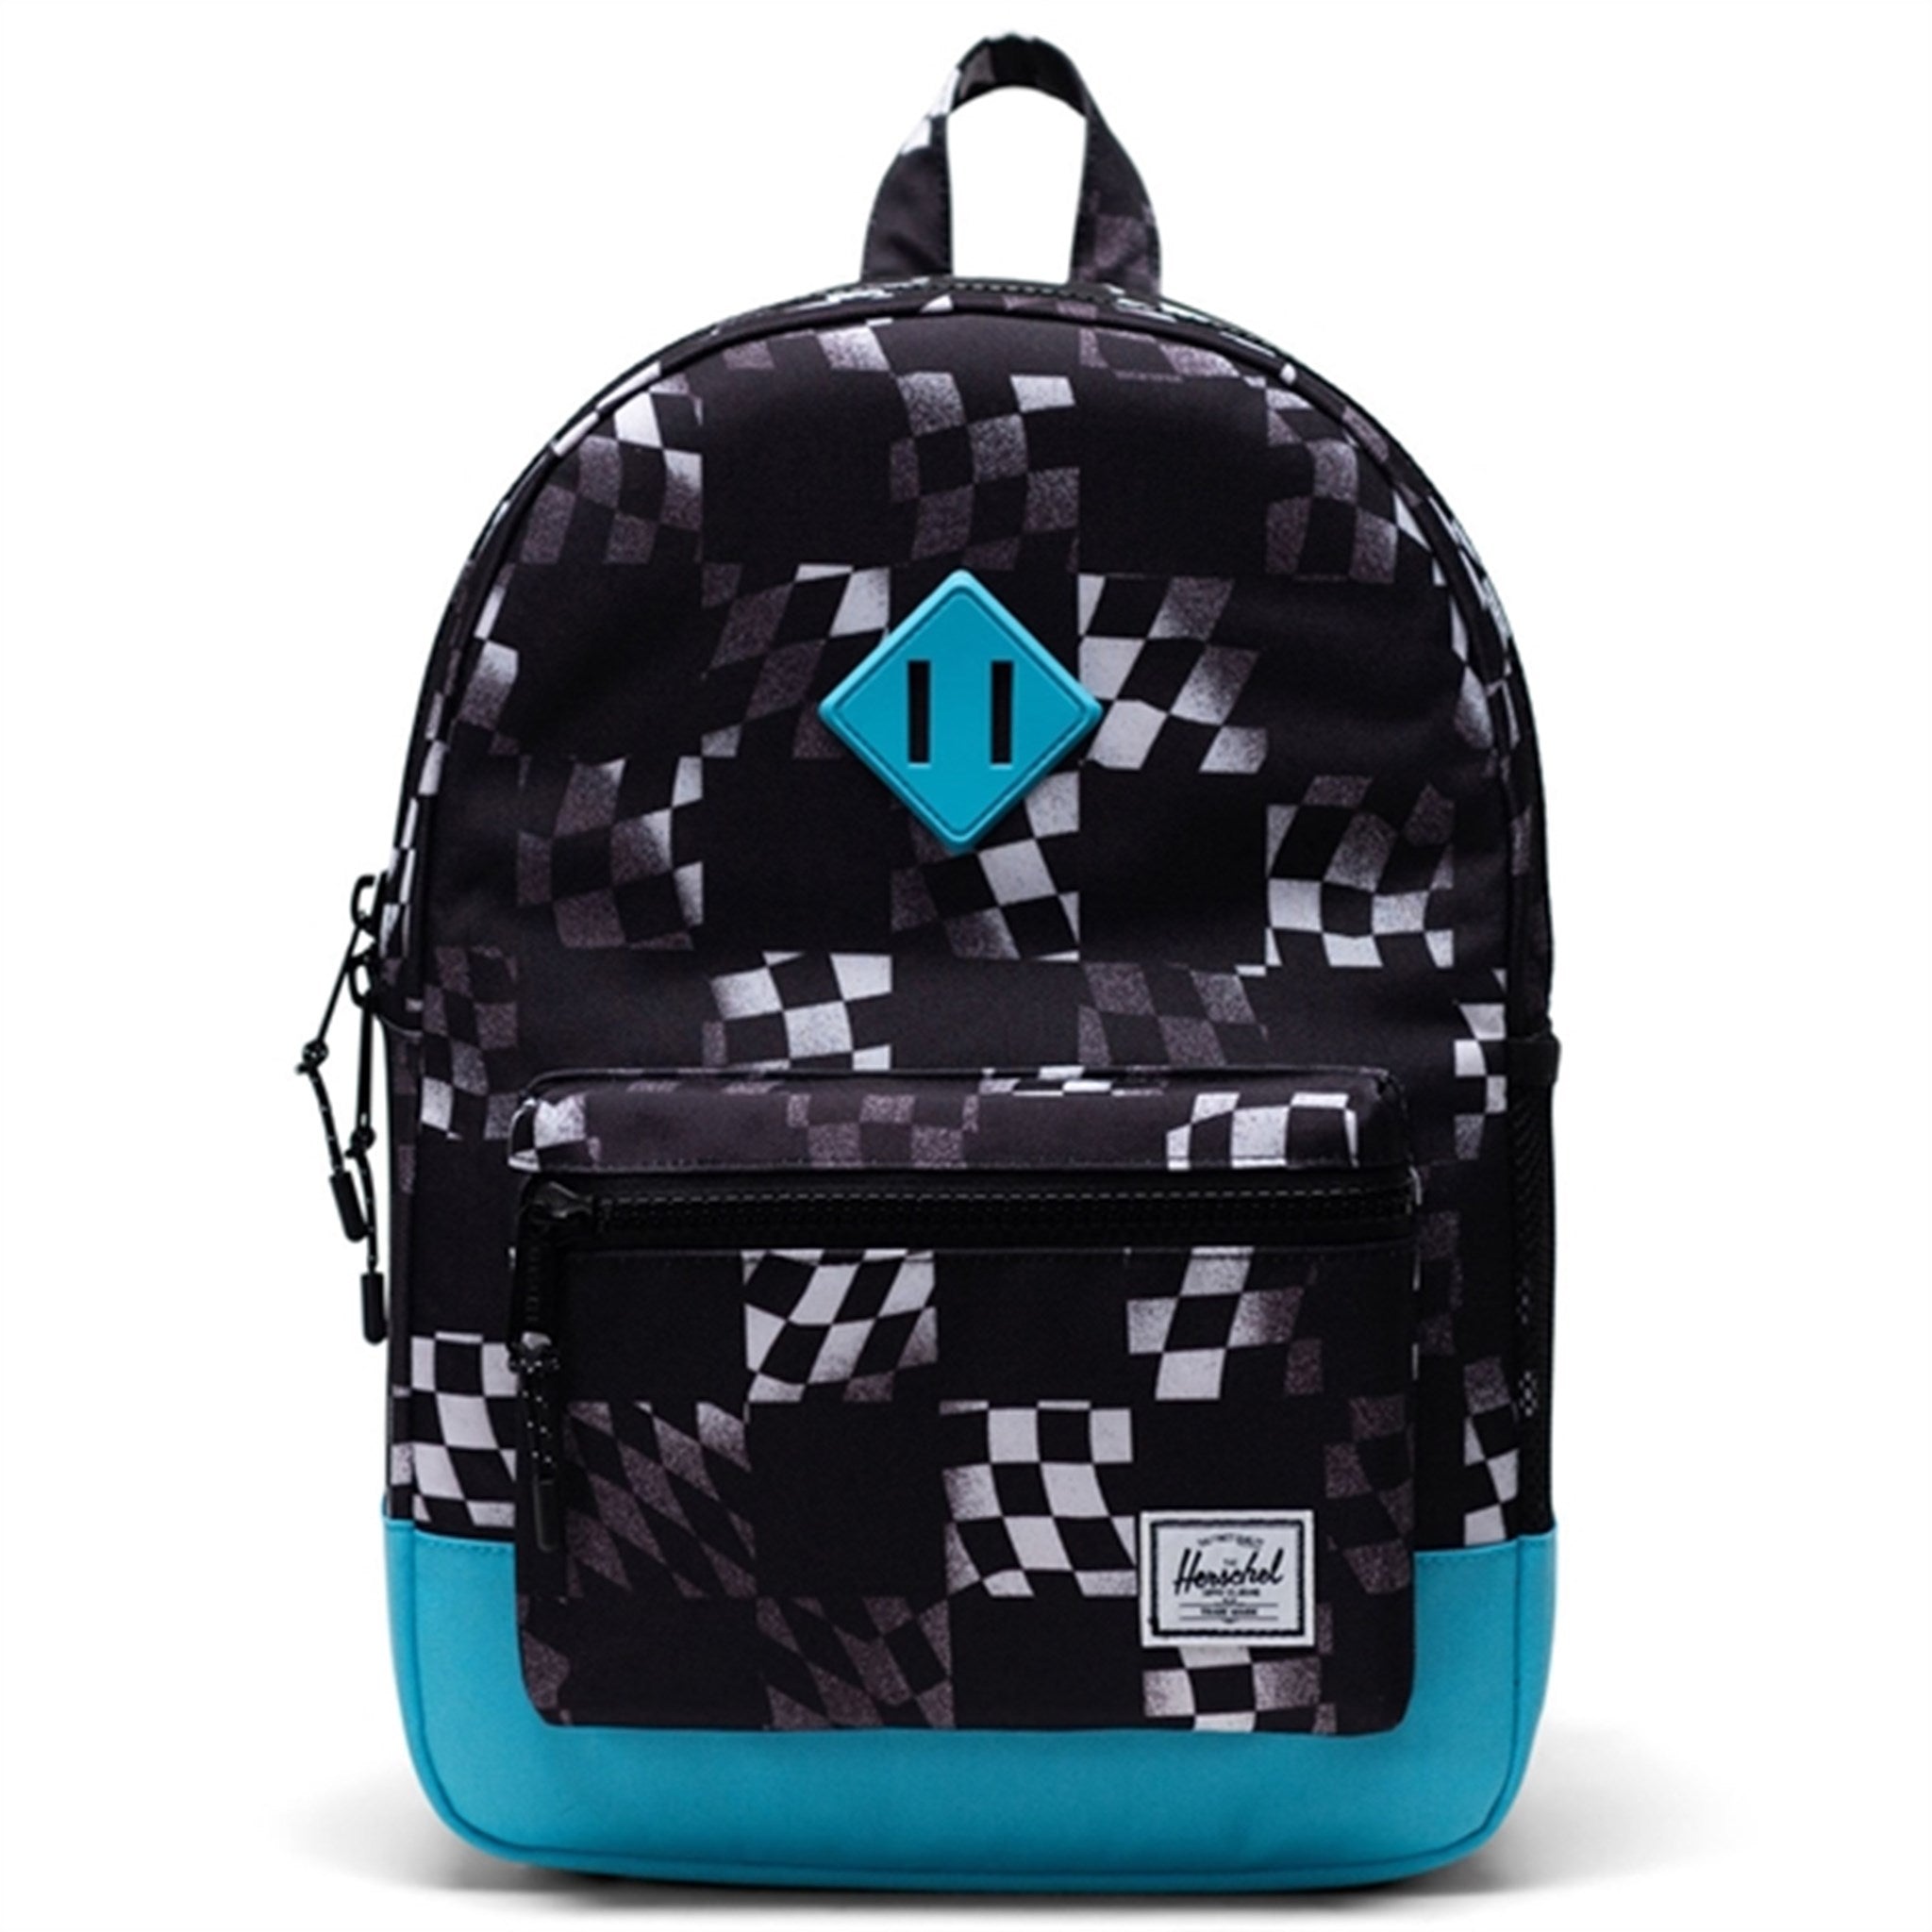 Herschel Heritage Youth Backpack Race Check